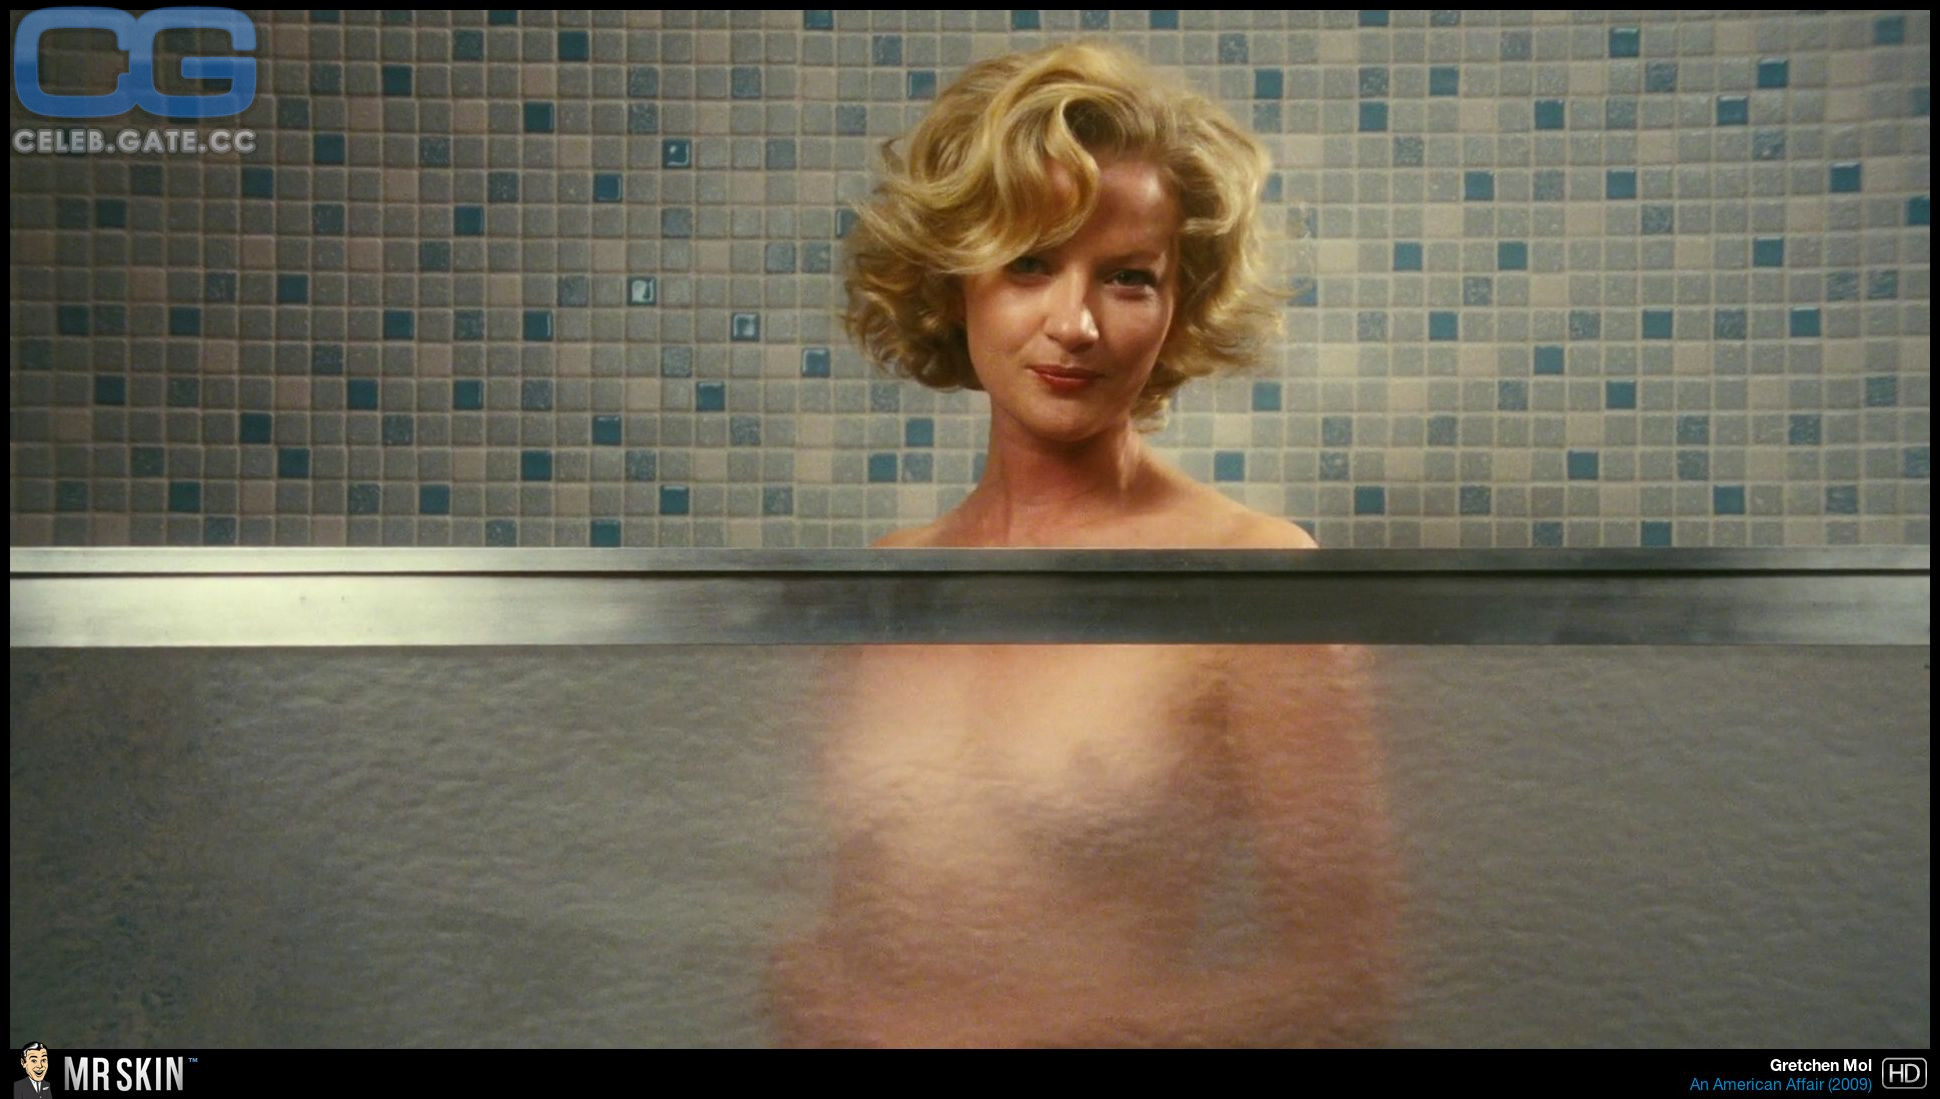 Gretchen Mol Nude Fakes Free Xxx Images Hot Sex Pics And Best Porn